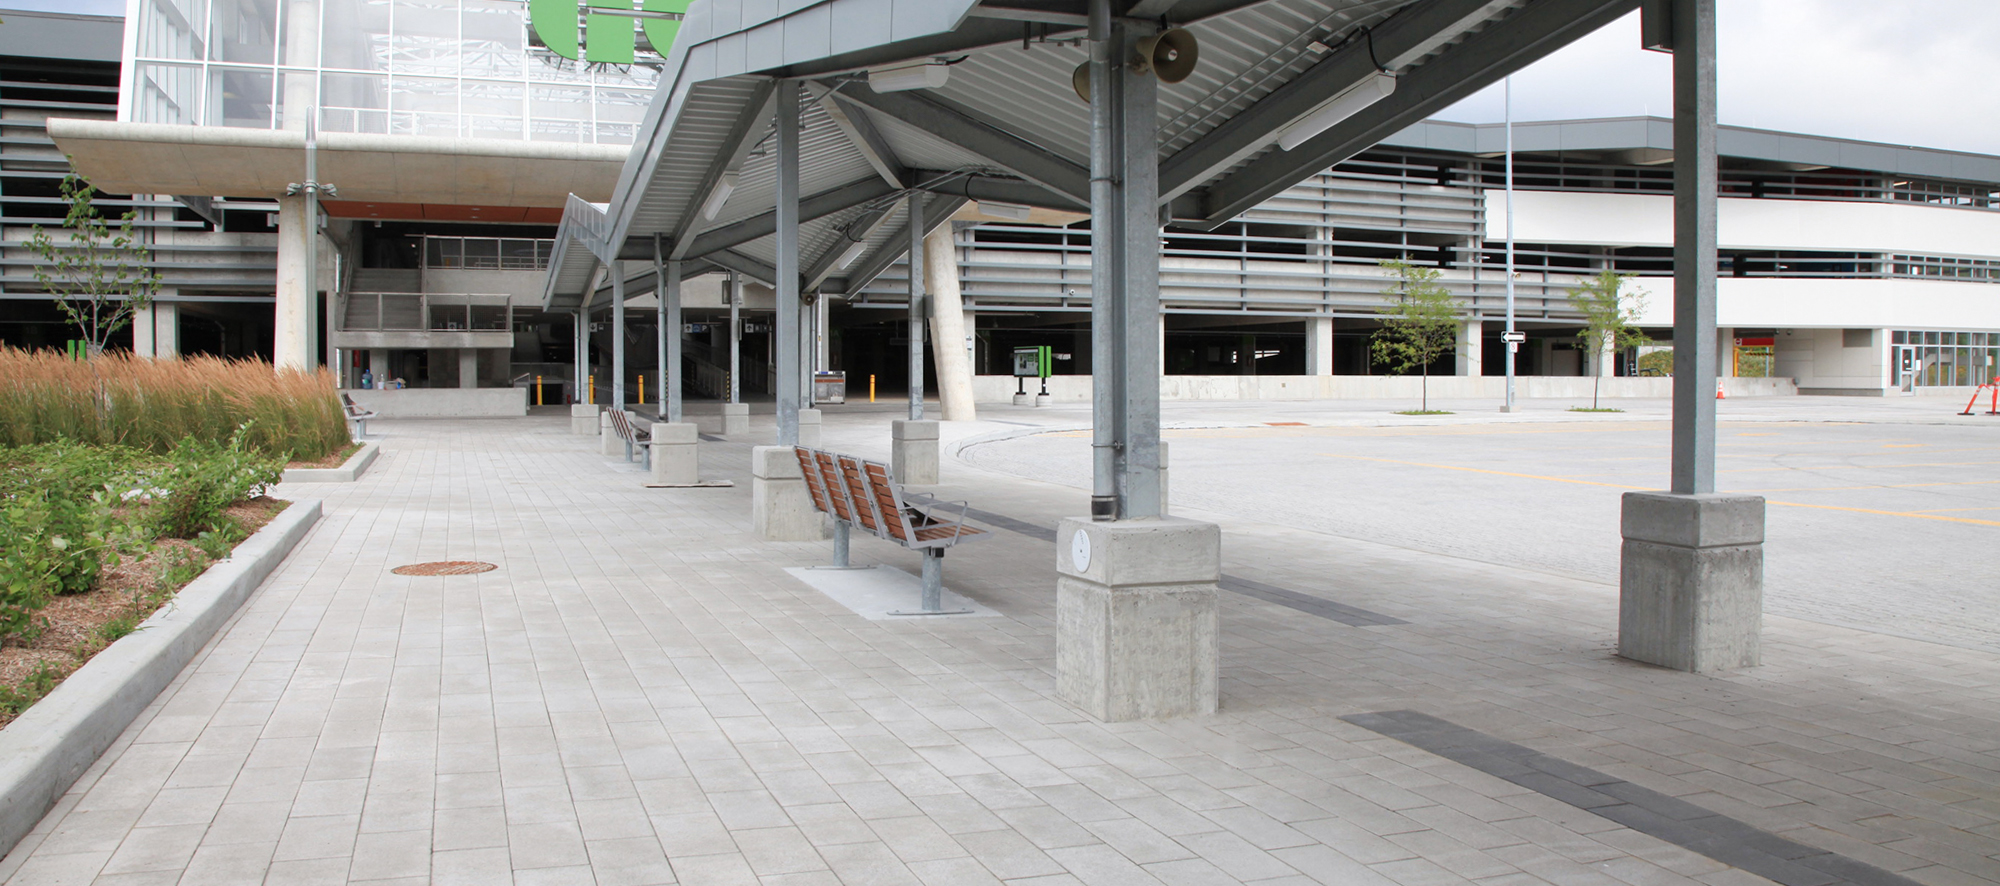 The entrance to Bloomington Go has shelter, benches and landscaping on Grenada white Umbriano pavers with accents in Series Black Granite.